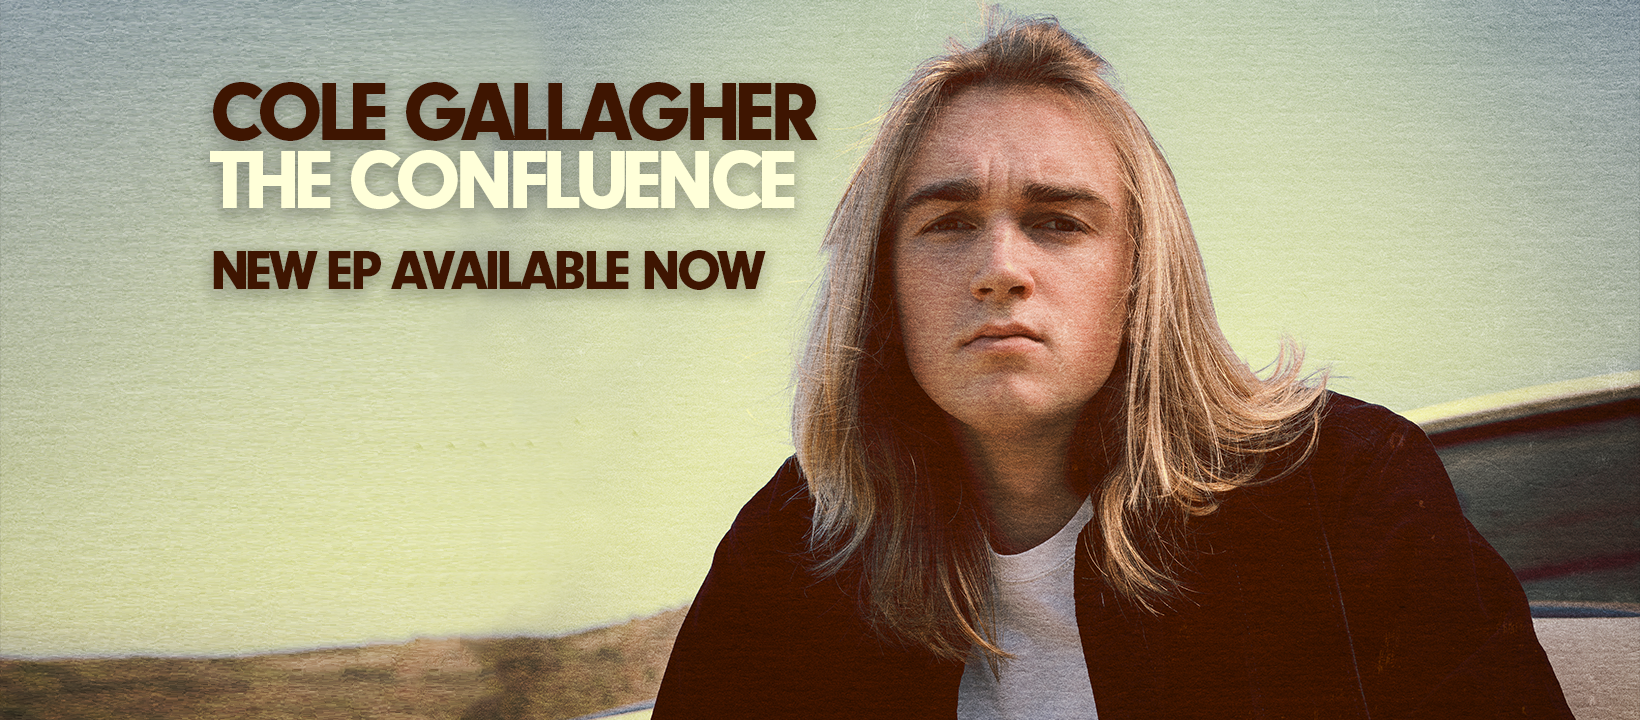 Singer/Songwriter Cole Gallagher Releases Debut EP The Confluence